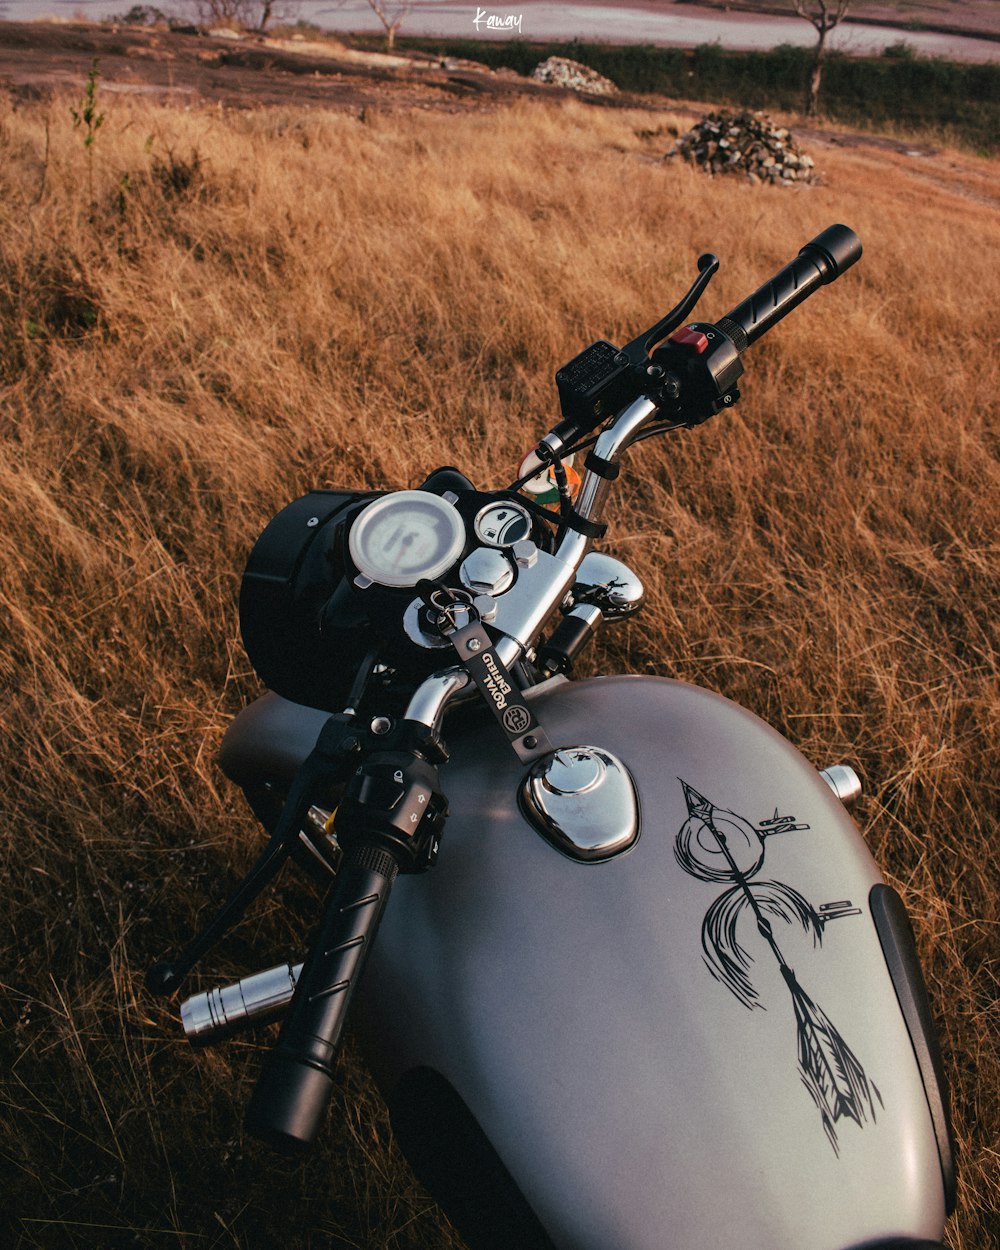 a motorcycle parked in a field of tall grass